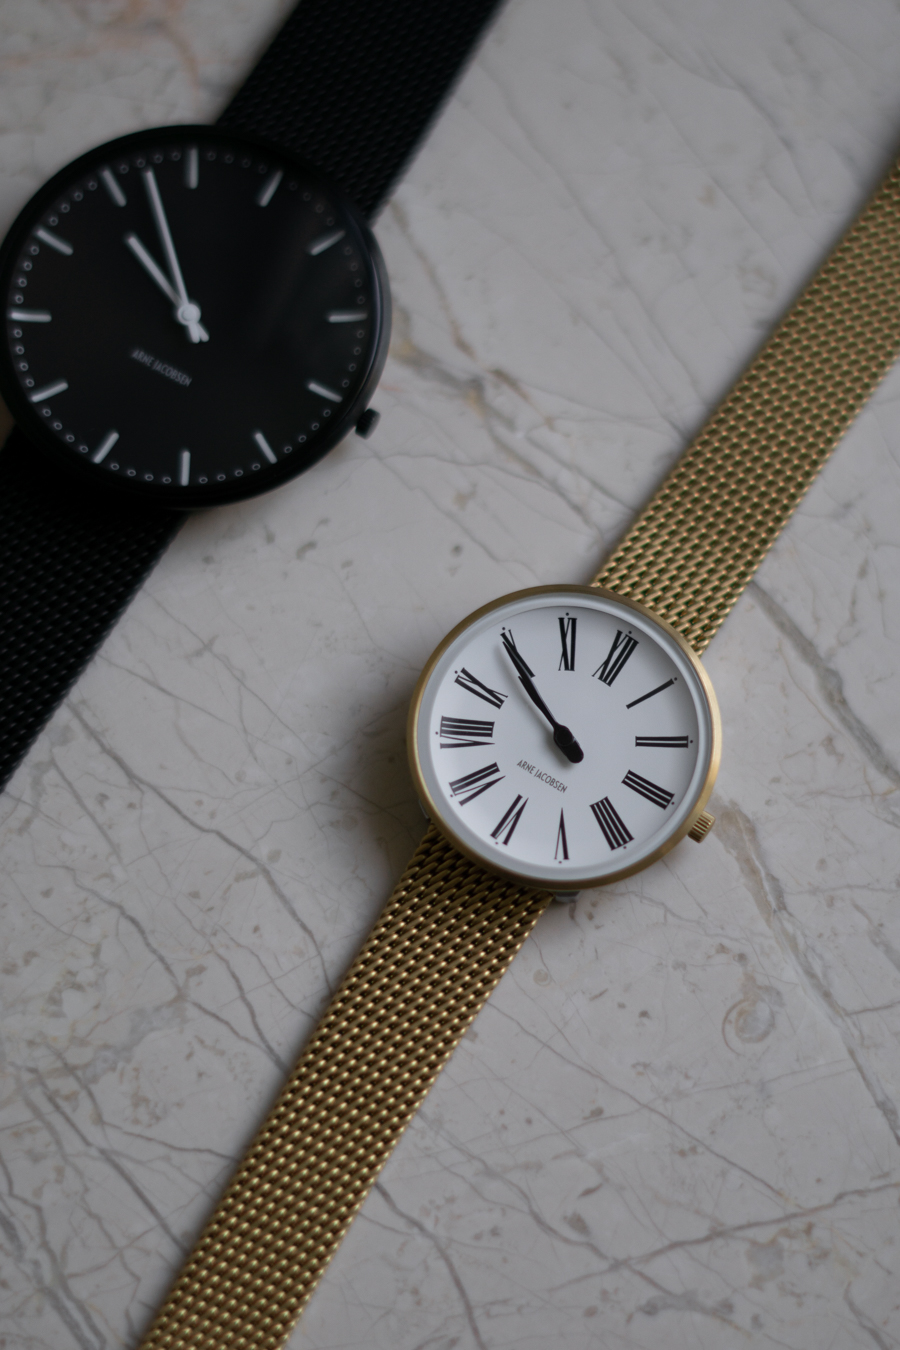 Arne Jacobsen Watches - RG Daily Blog